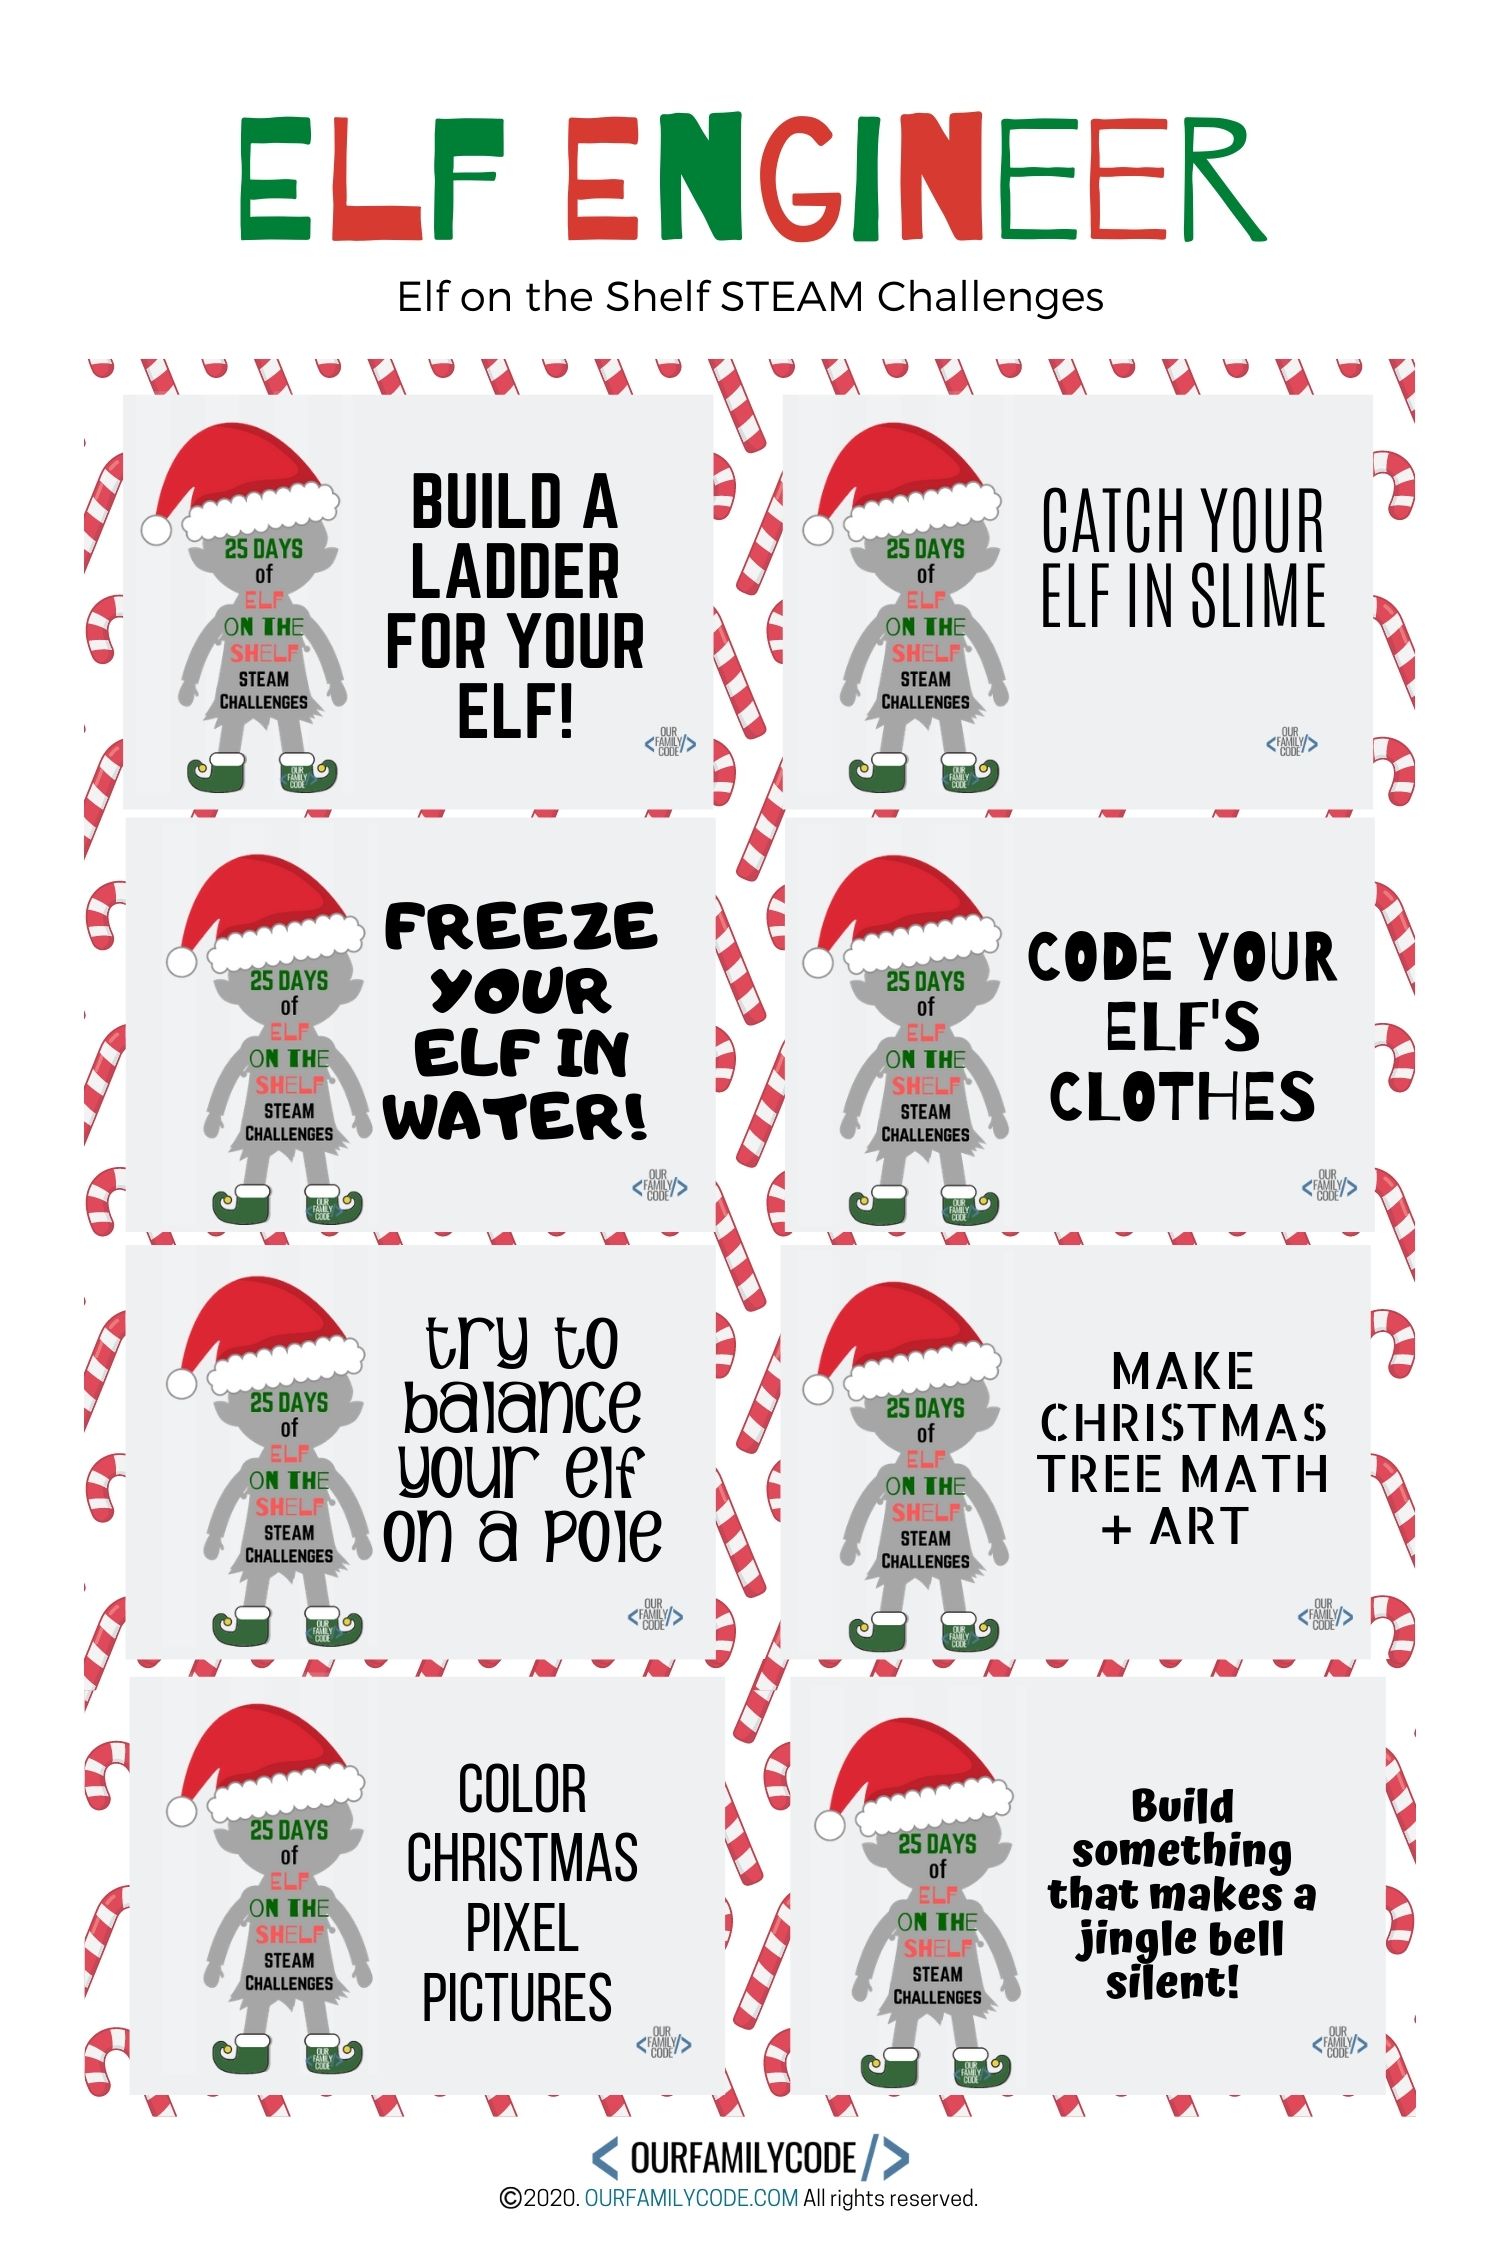 A picture of elf on the shelf steam challenge cards.